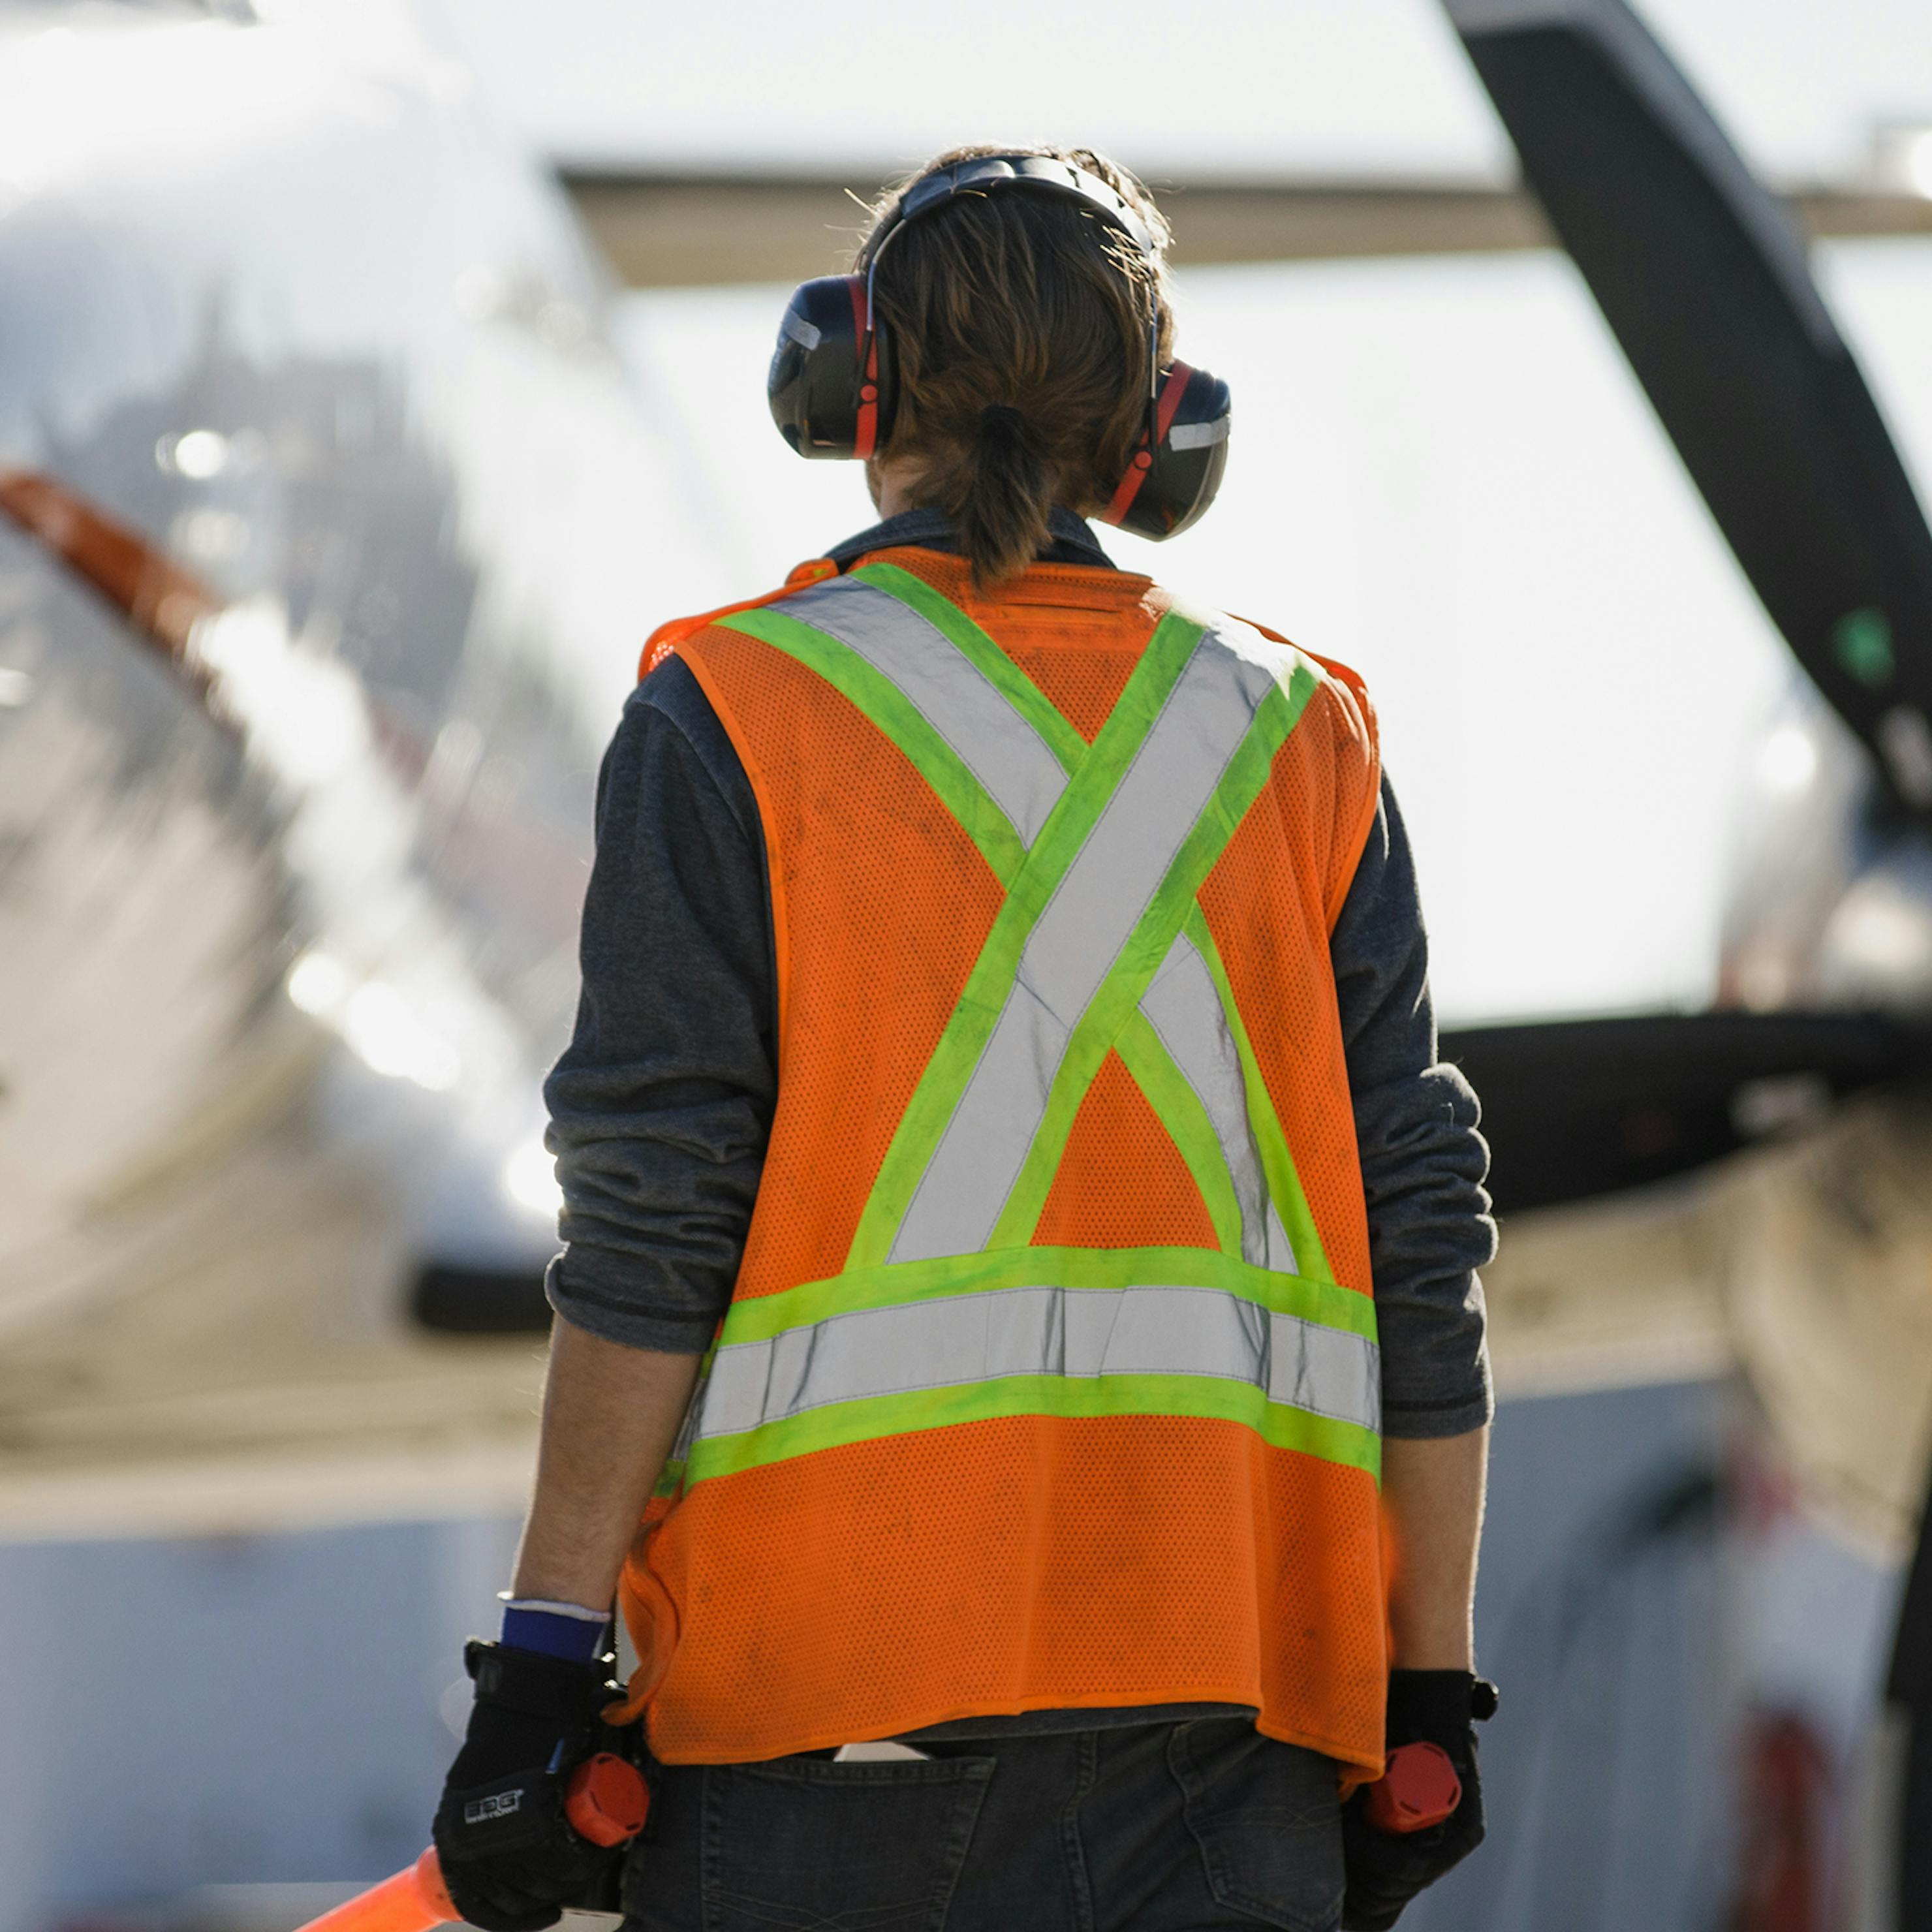 Man standing on apron holding orange batons and wearing hearing protection. Ready to direct the aircraft.